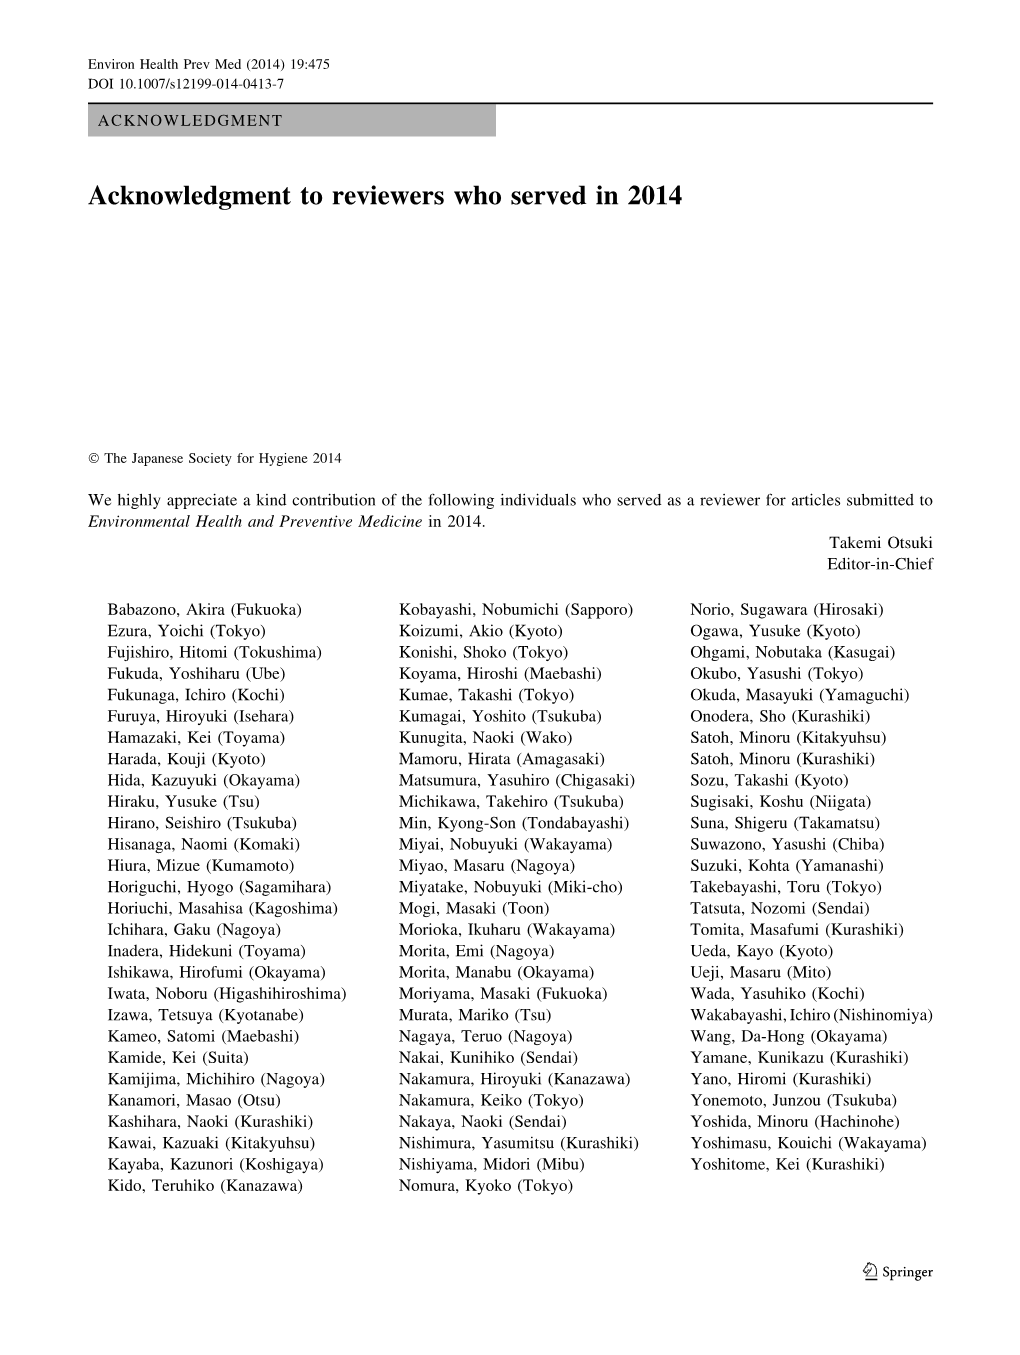 Acknowledgment to Reviewers Who Served in 2014